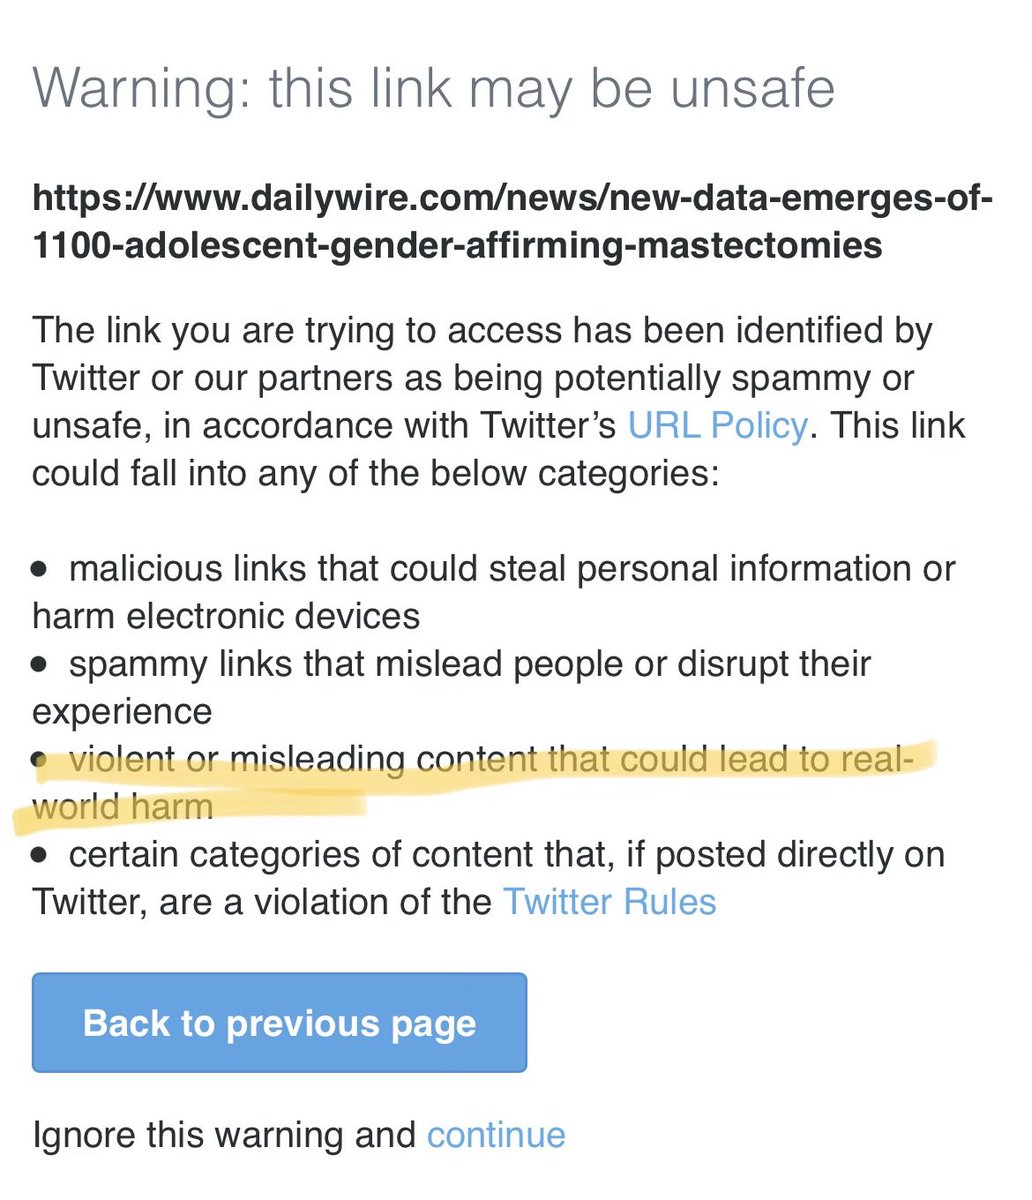 Meet the new Twitter. Same as the old Twitter. The Daily Wire published a factual report about gender surgeries being conducted on minors and this is the warning that comes up if you try to click on it. Absolutely outrageous. The woke brigade is still in charge here.